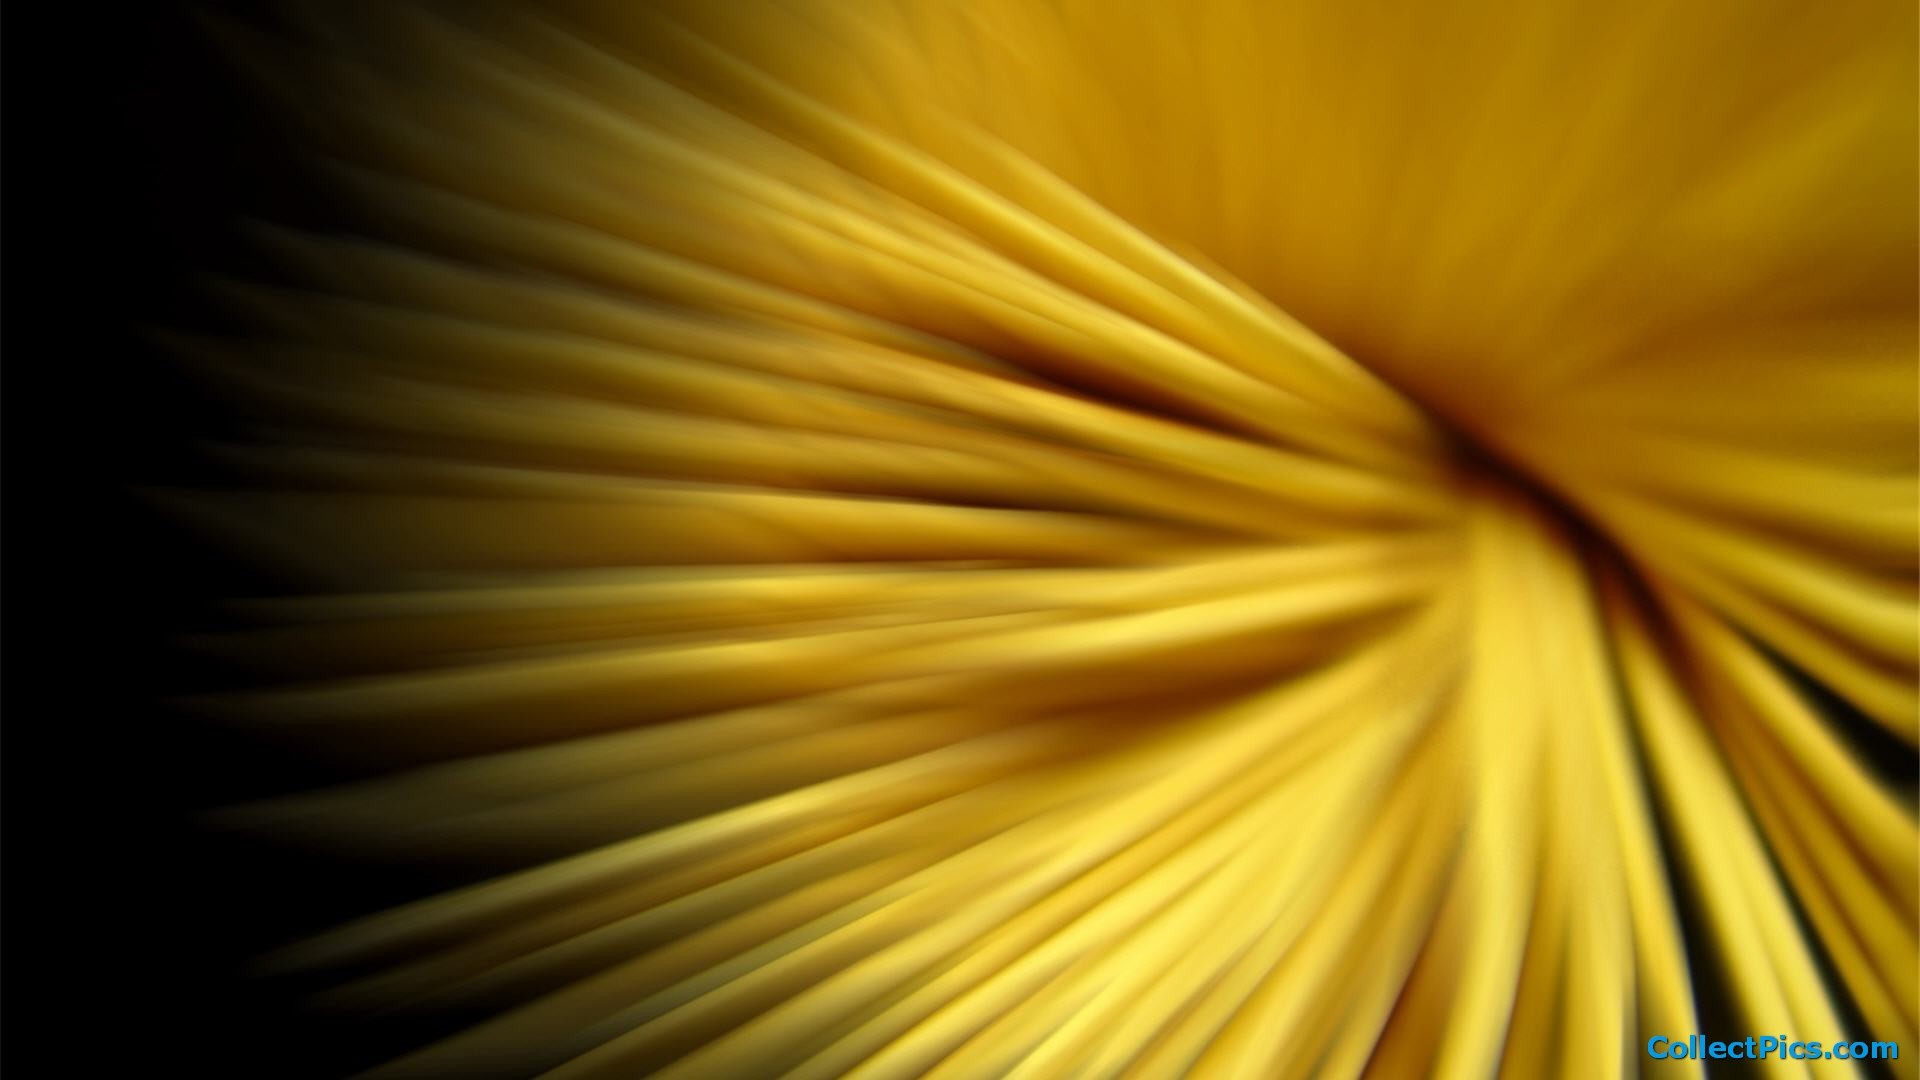 1920x1080 Black And Yellow Abstract Desktop Wallpapers 1515 | HD Wallpaper Site